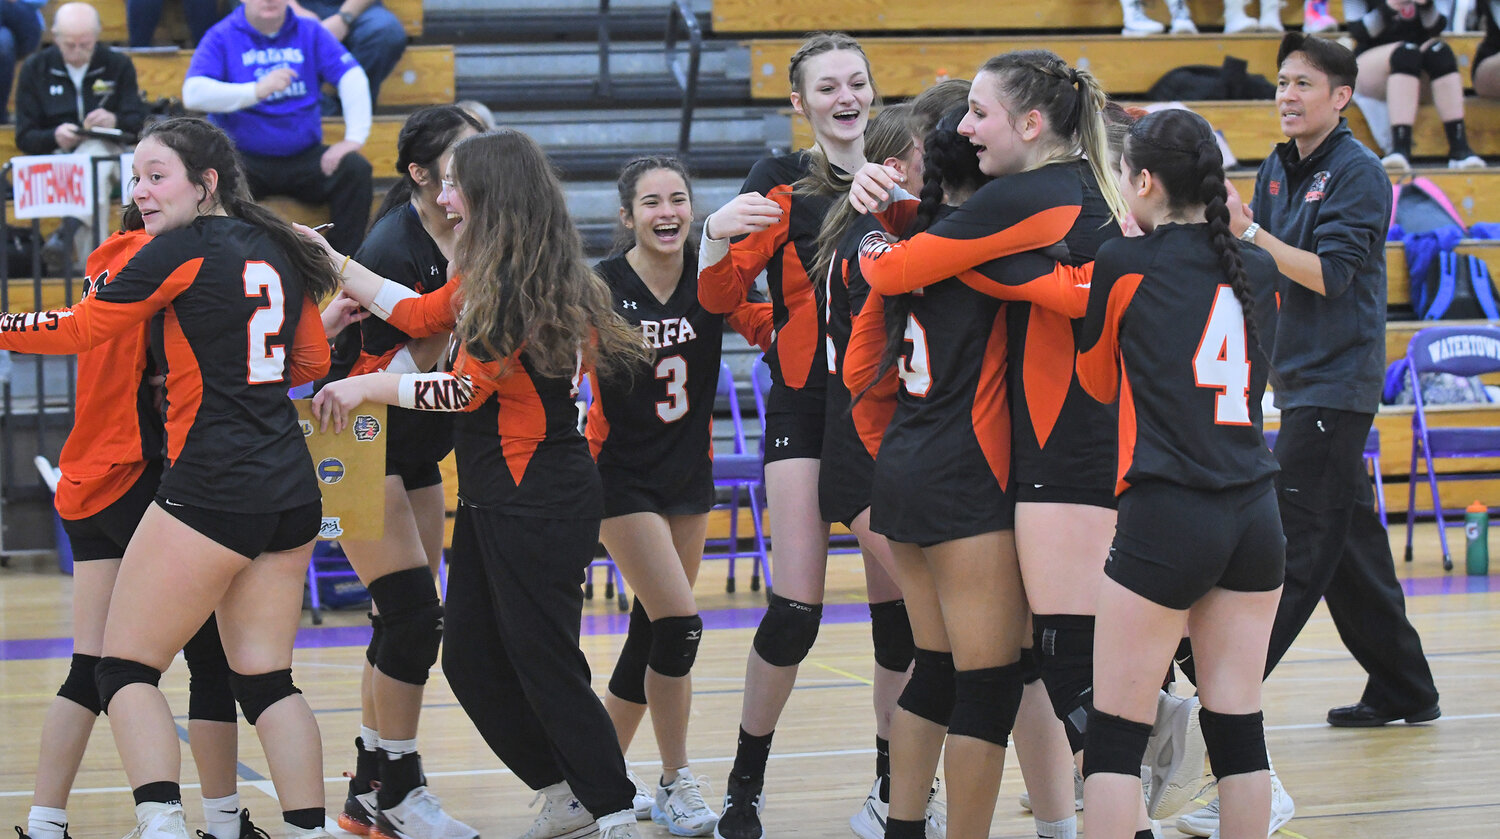 Rome Free Academy Black Knights girls volleyball team celebrate after they defeated Whitesboro in the Class A finals in February. Pete Keoviengsamay was named the Tri-Valley League coach of the year after helping guide the team.